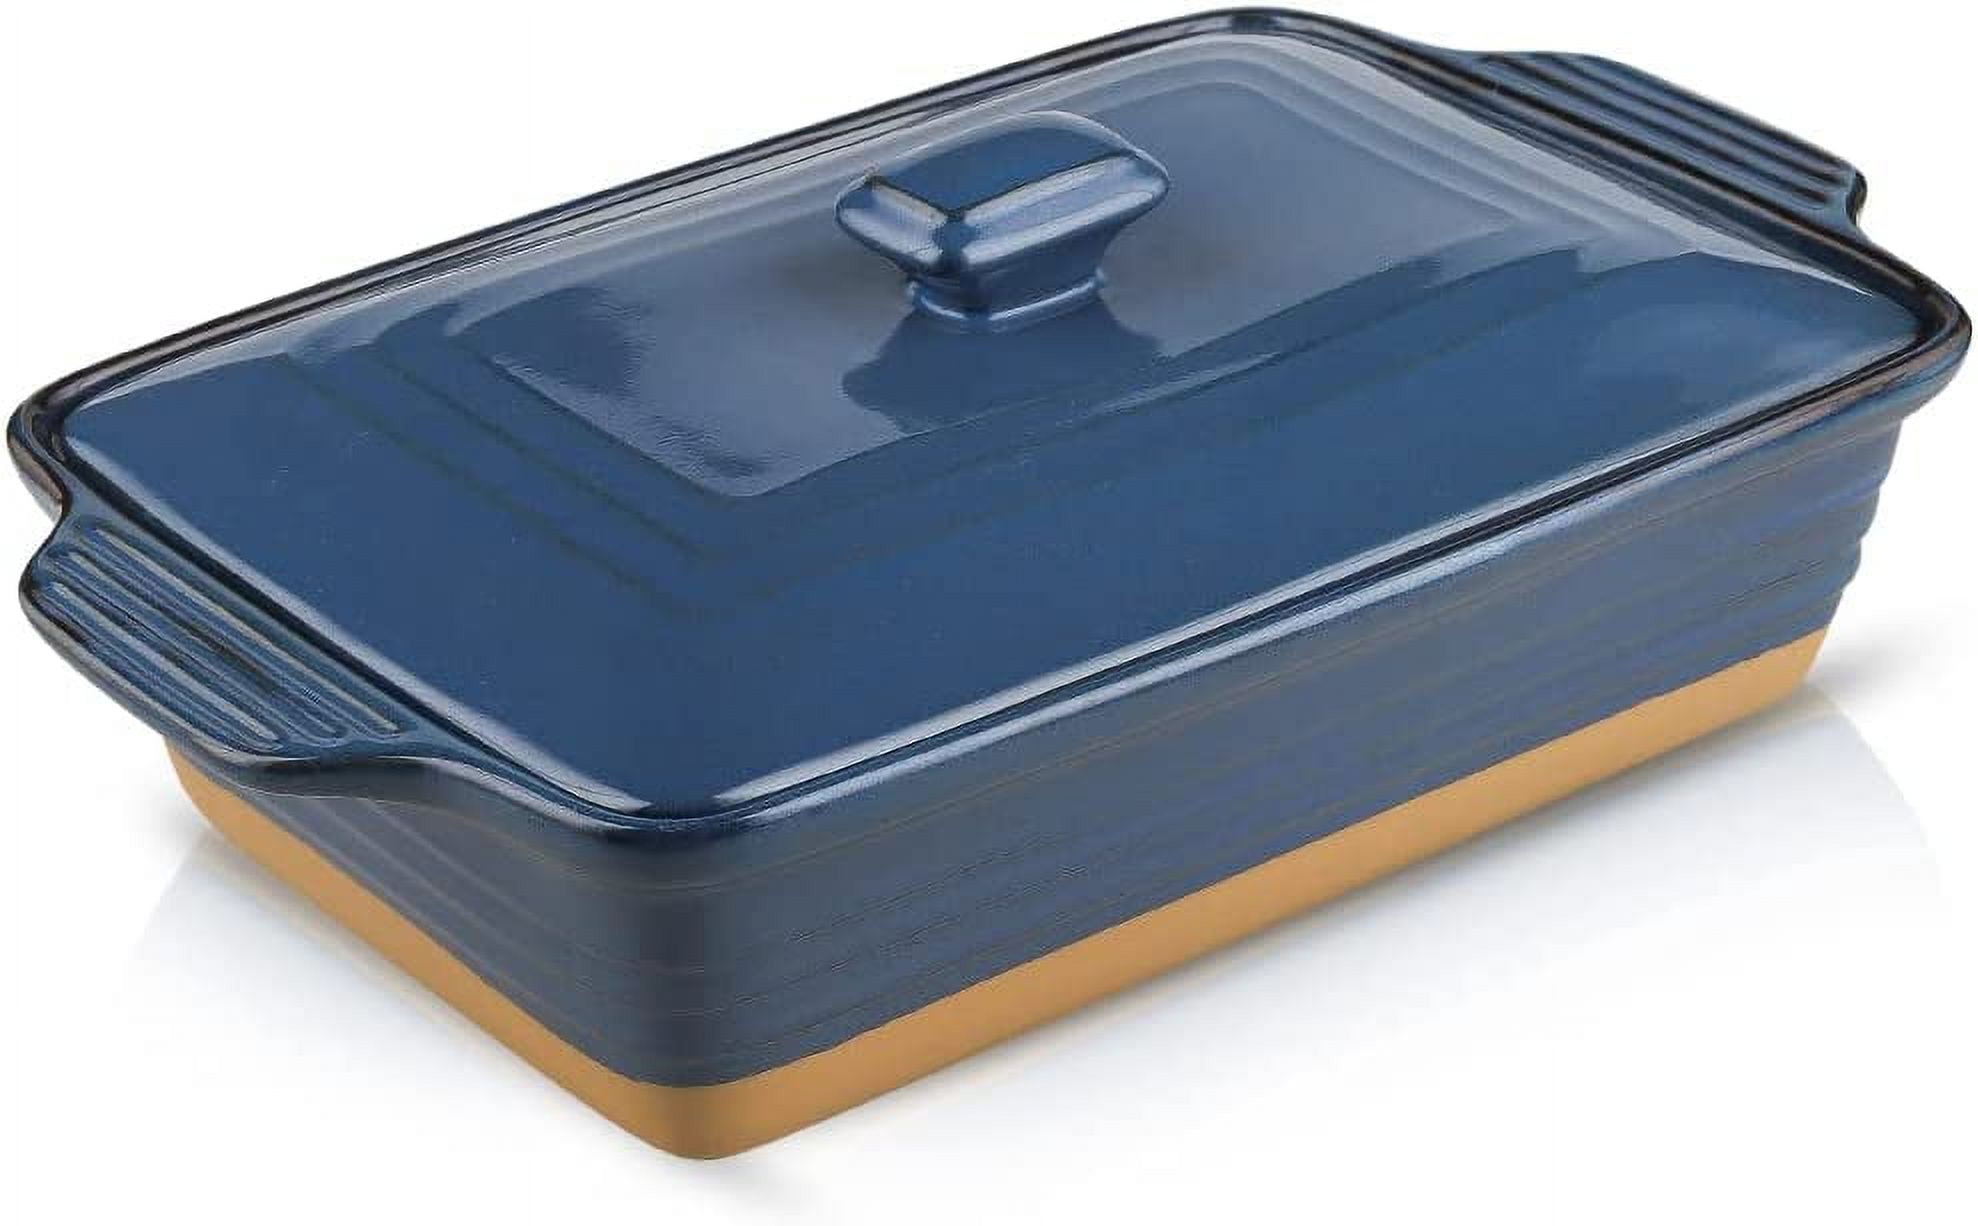 Baking Dishes for Oven, 3 Pcs Casserole Dish Blue, Ceramic Baking Dishes  for Casseroles (4.9/7.8/11.7) 